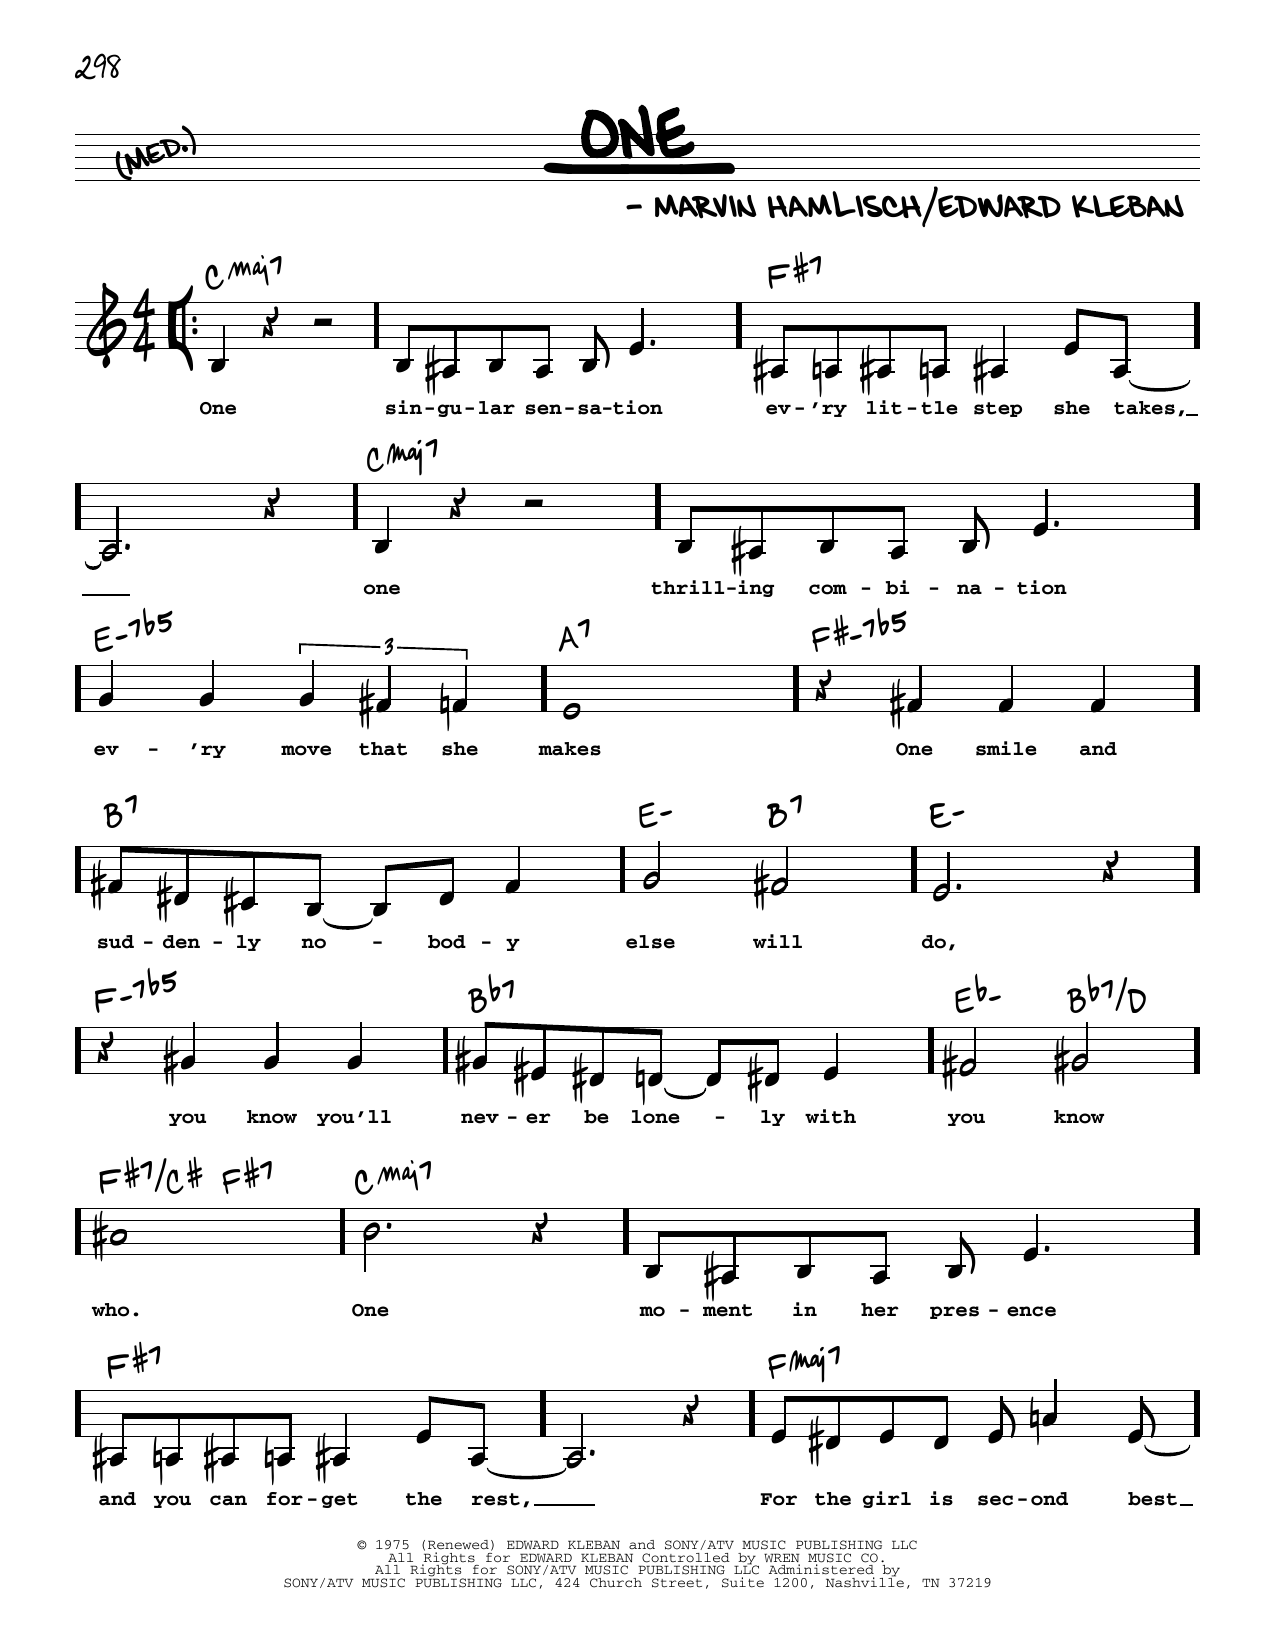 Marvin Hamlisch One (from A Chorus Line) (Low Voice) sheet music notes printable PDF score